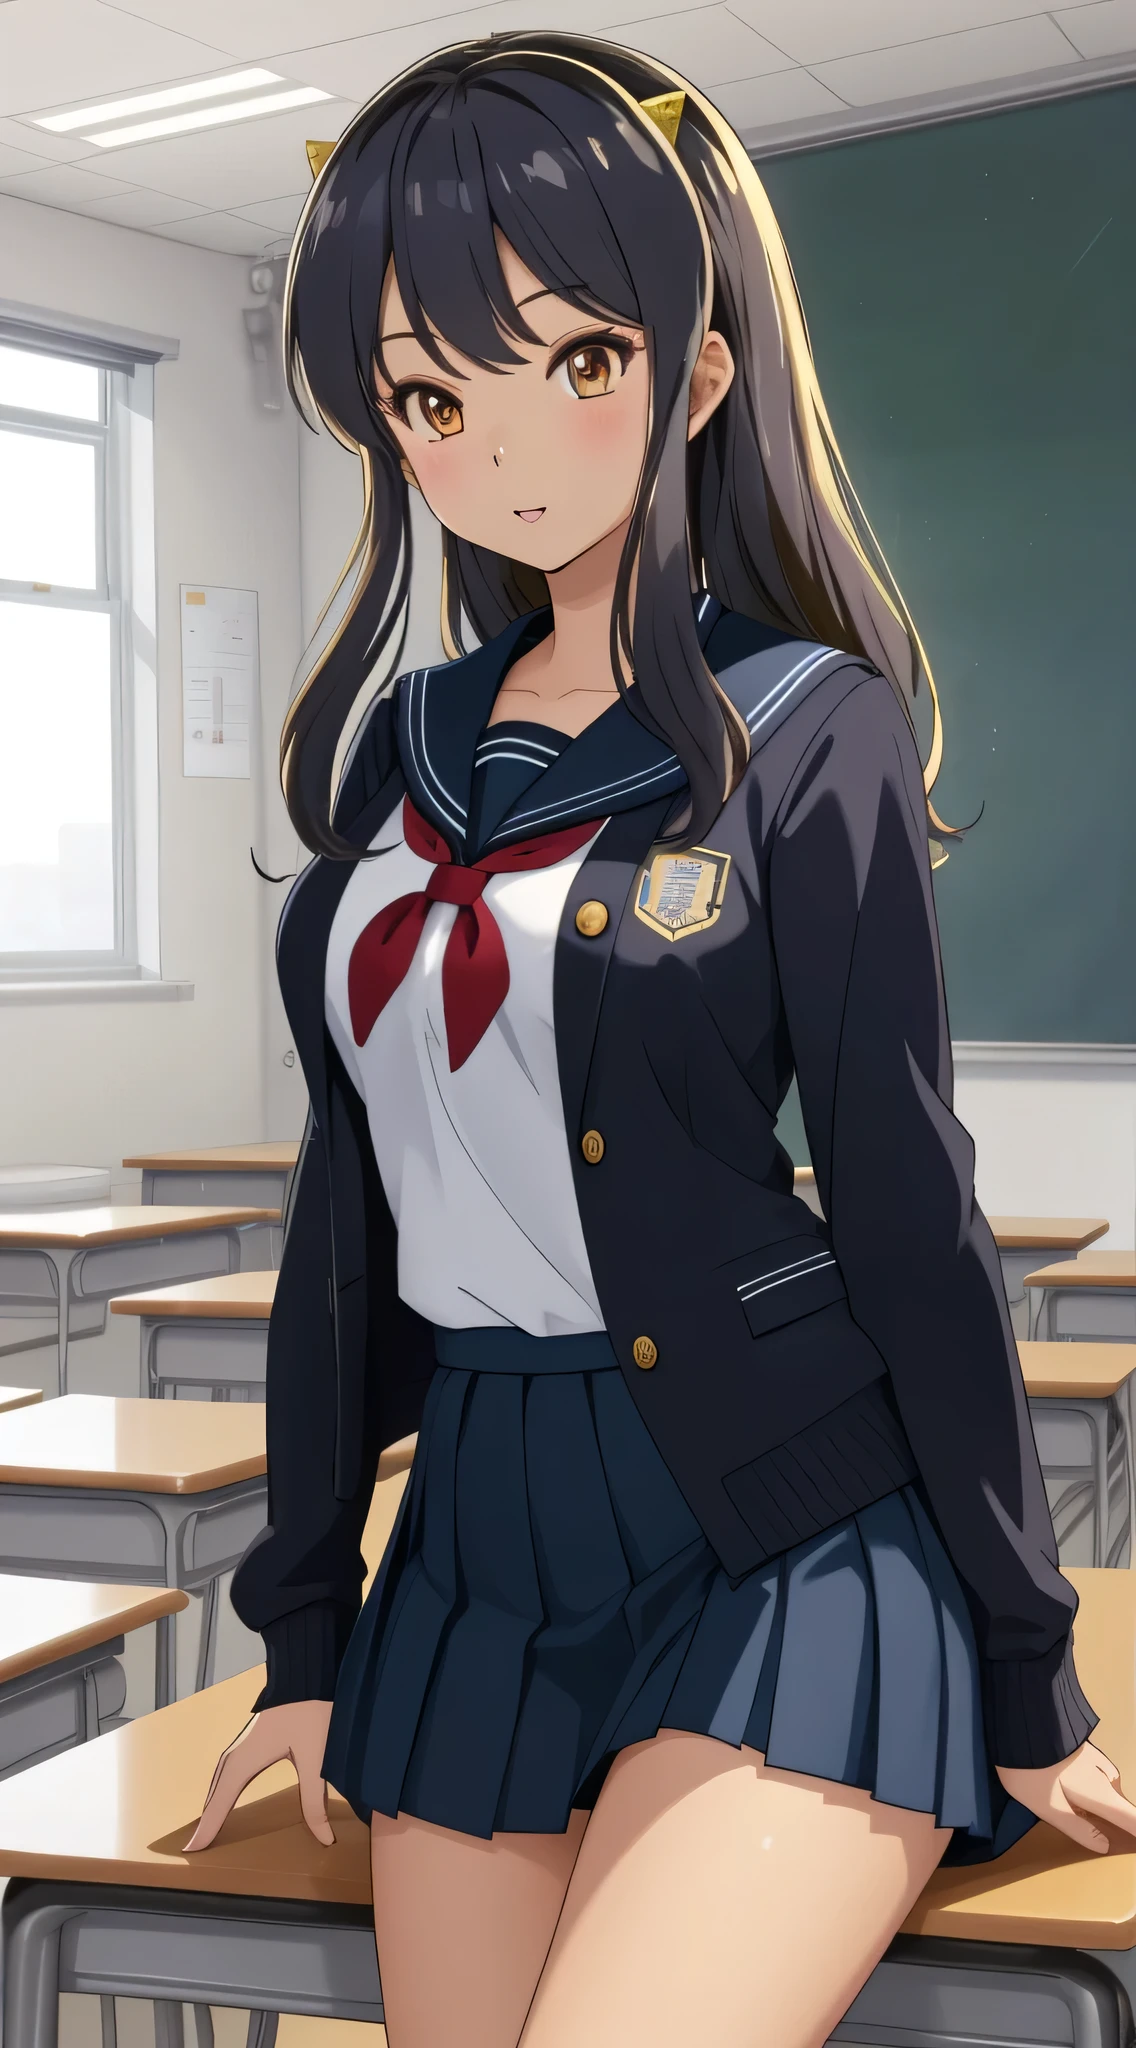 Ram, sexy, Mature face, Sexy smile、Extremely detailed eyes、Blue Eyes, Turquoise Hair、Cute demon horns、2Book corner、Tabletop, (Penetration: 1.2),((Short sailor suit, Detailed and accurate)), Summer 3/4 sleeve shirt、In a glamorous body, Big Breasts:1.6, ((School uniform skirt)), (I can see her panties, Lace, Accurate and detailed), Sexy Poses,refer to４Bookの中に親refer to１Book,On a desk in the classroom、Classroom Background、